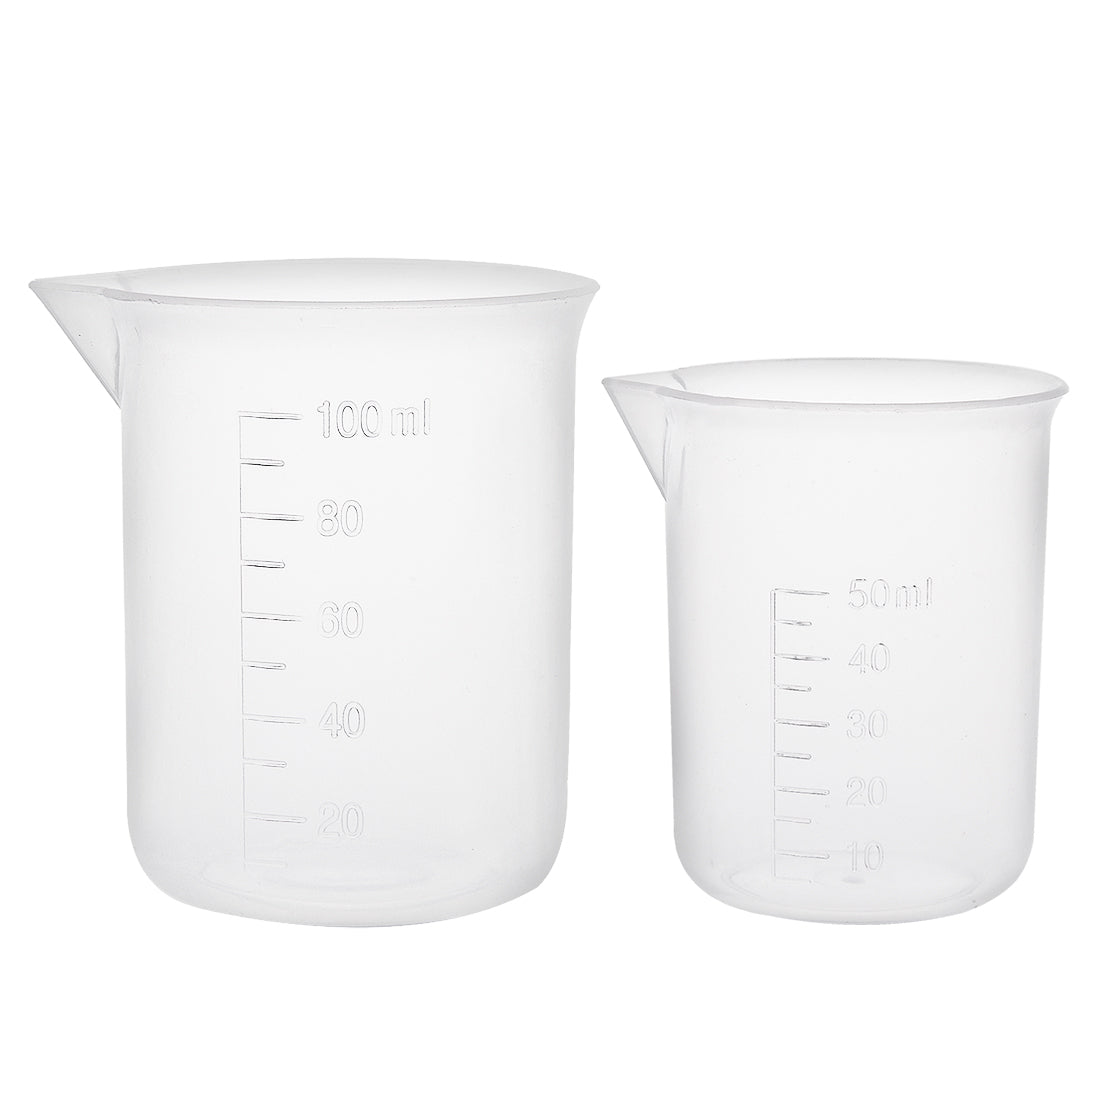 uxcell Uxcell Set of 2 Measuring Cup Labs Plastic Graduated Beakers 50ml 100ml